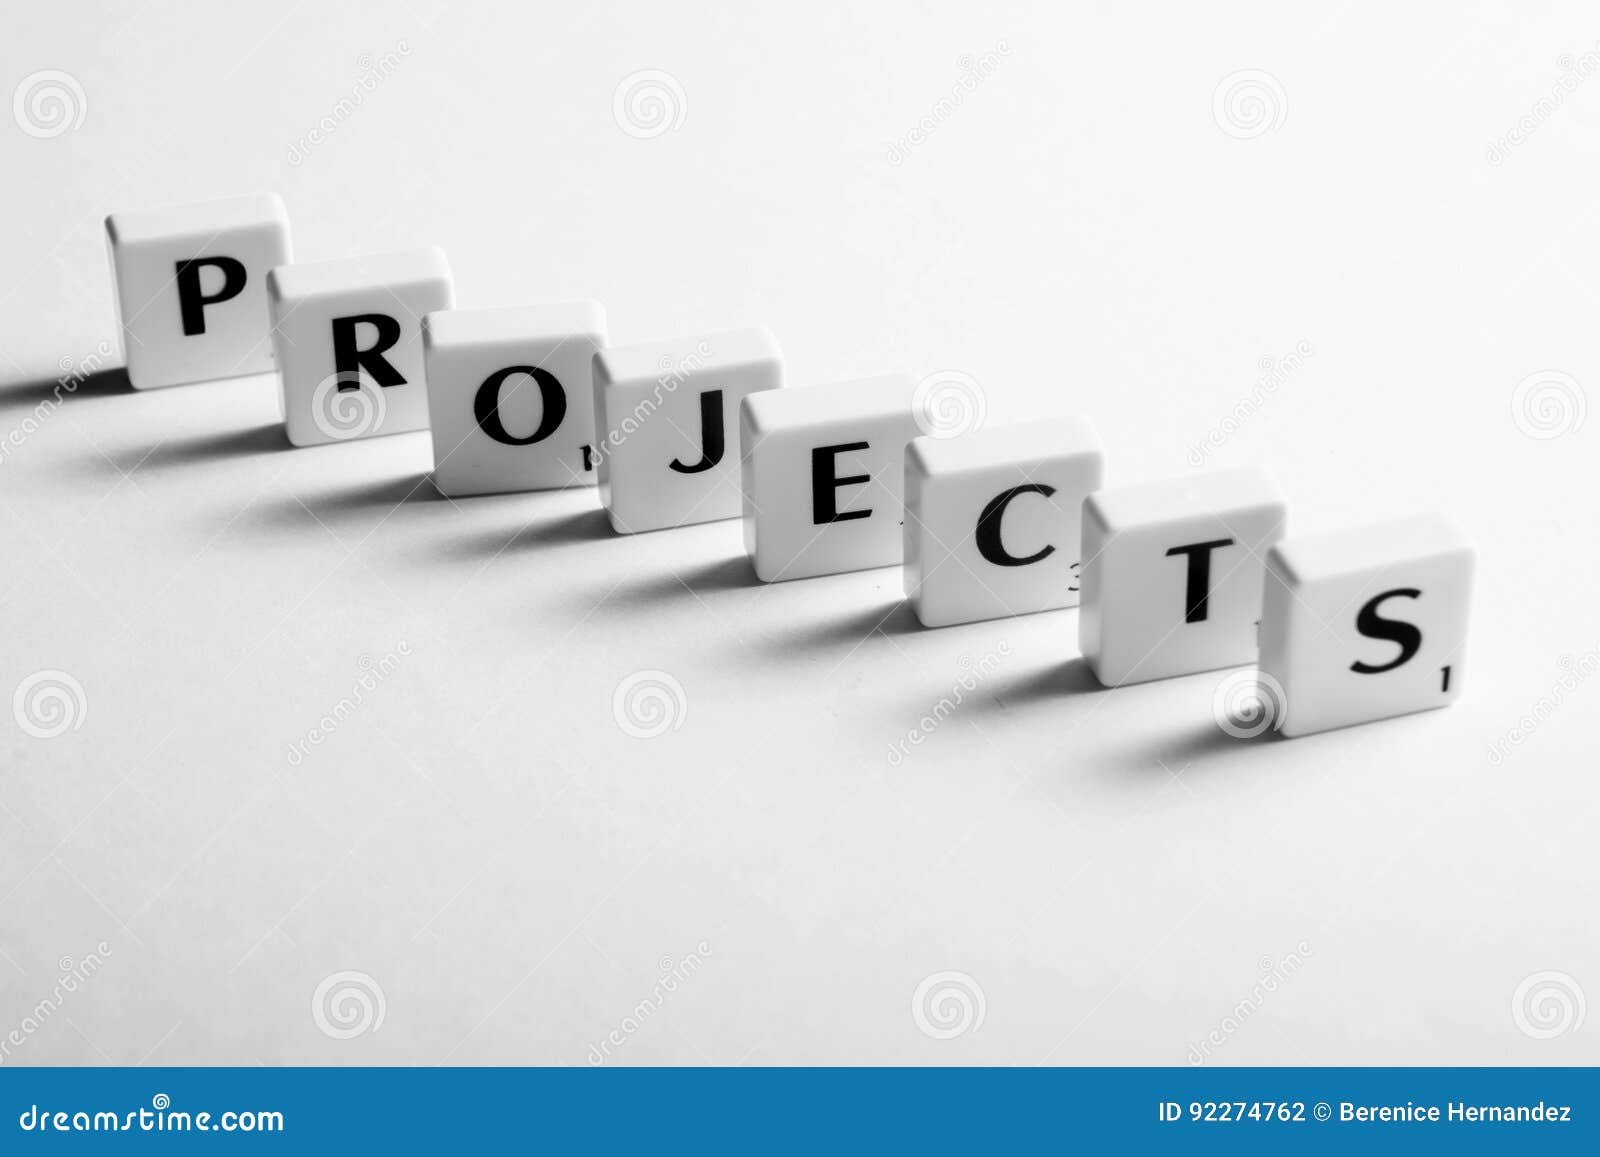 projects lead us to success